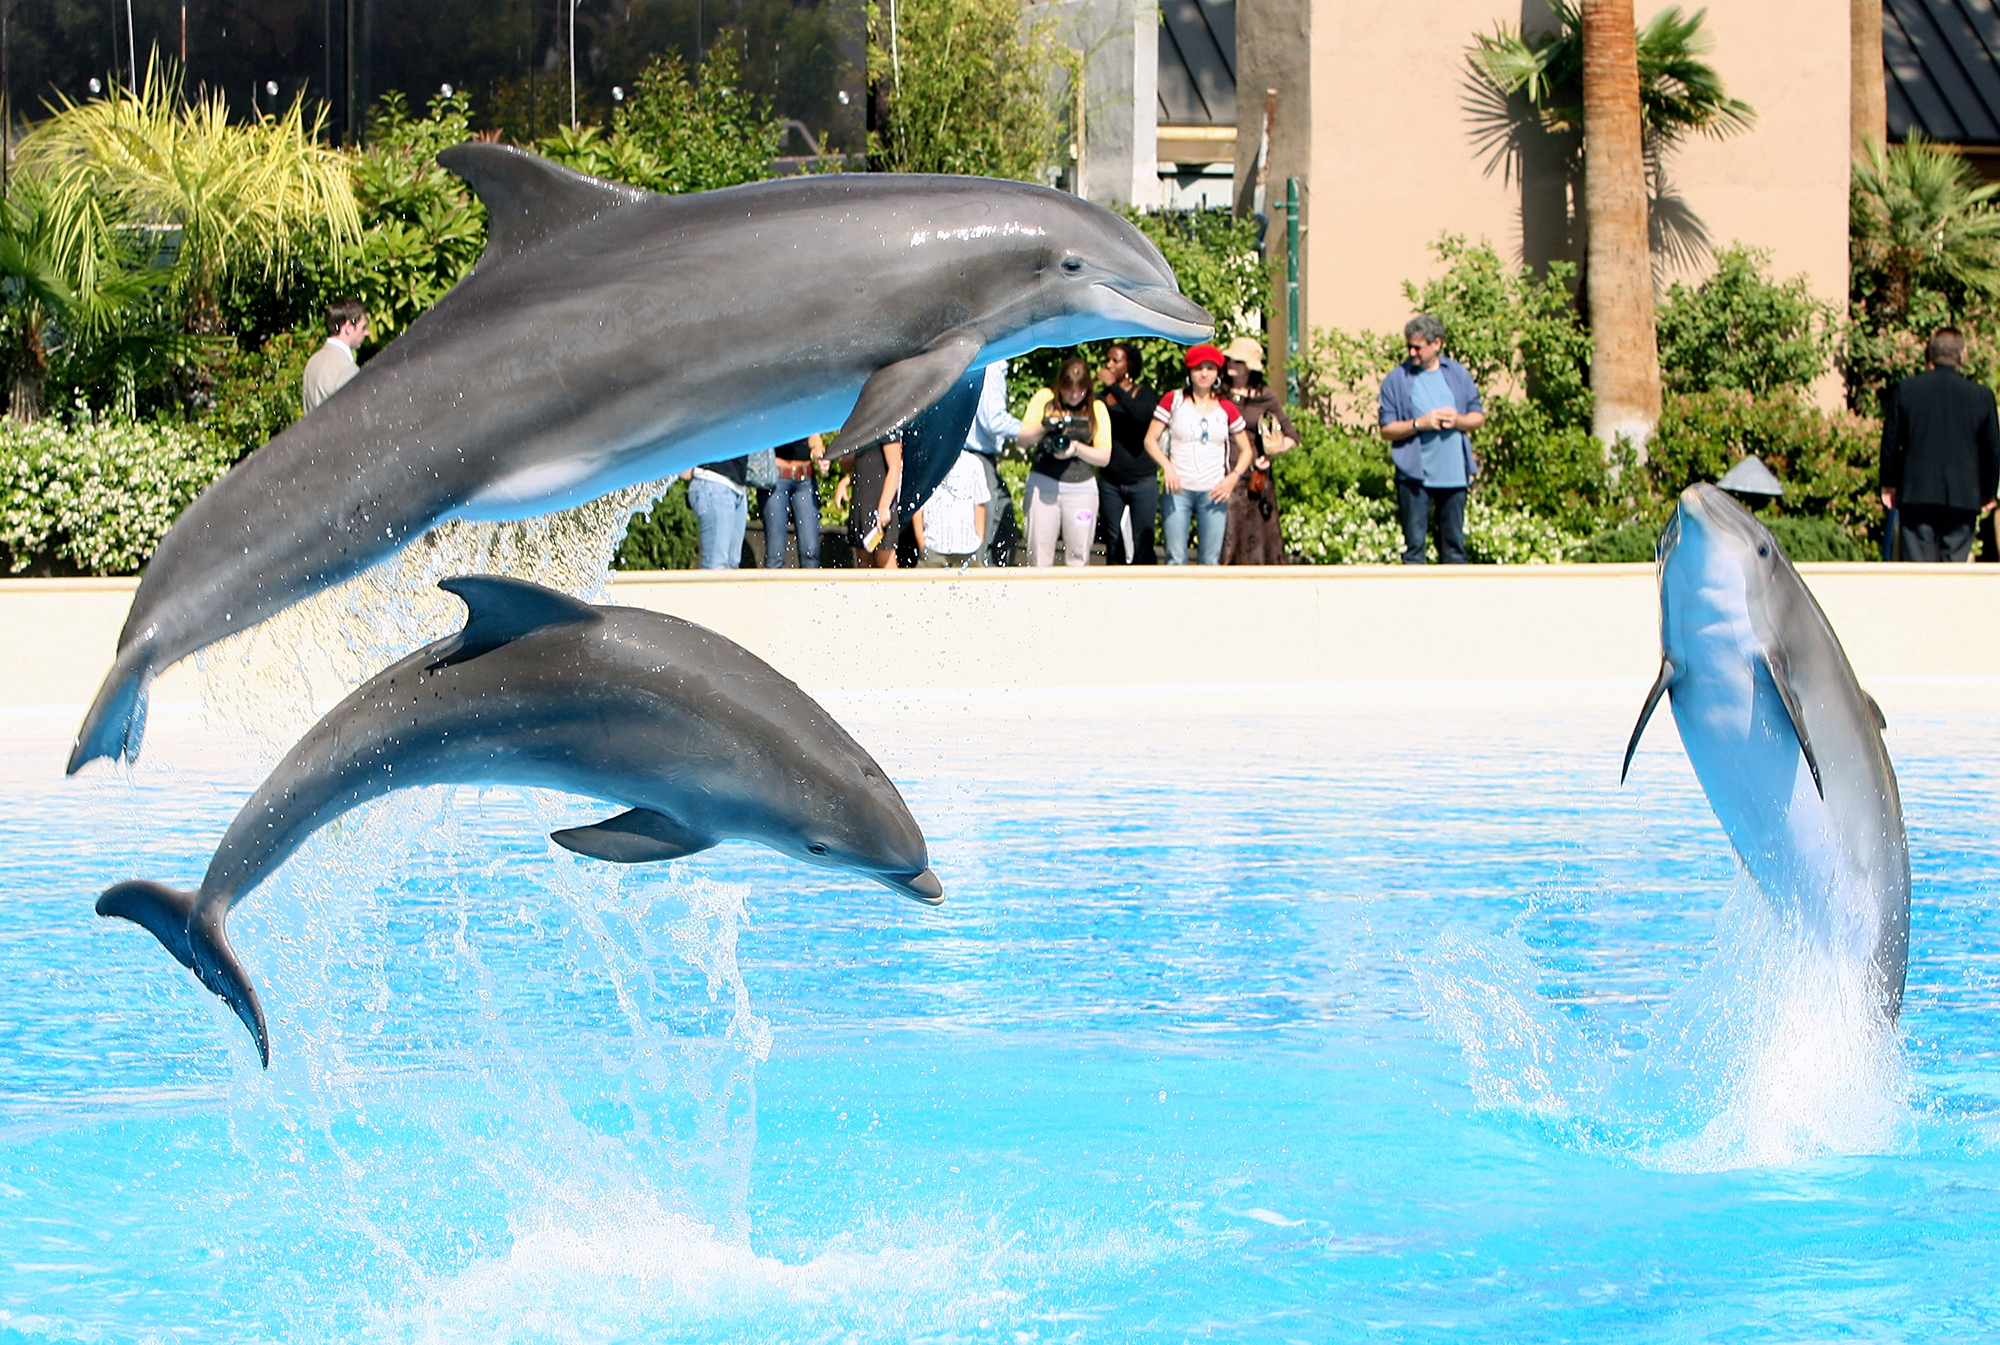 Dolphins leaping out of a blue pool of water as tourists look on at the Mirage Las Vegas